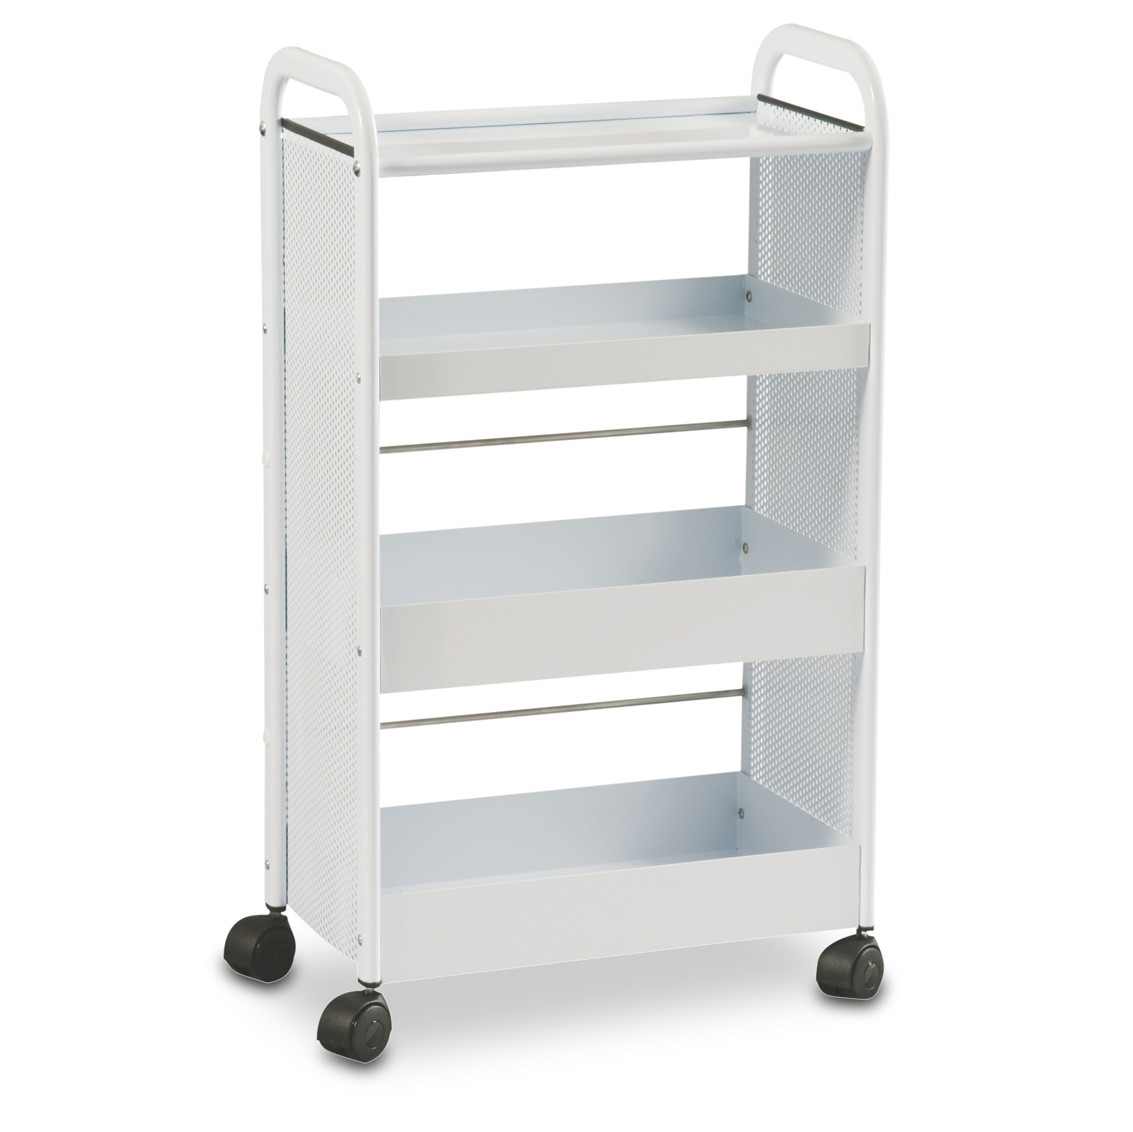 Multipurpose and multifunctional steel trolley with 4 shelves